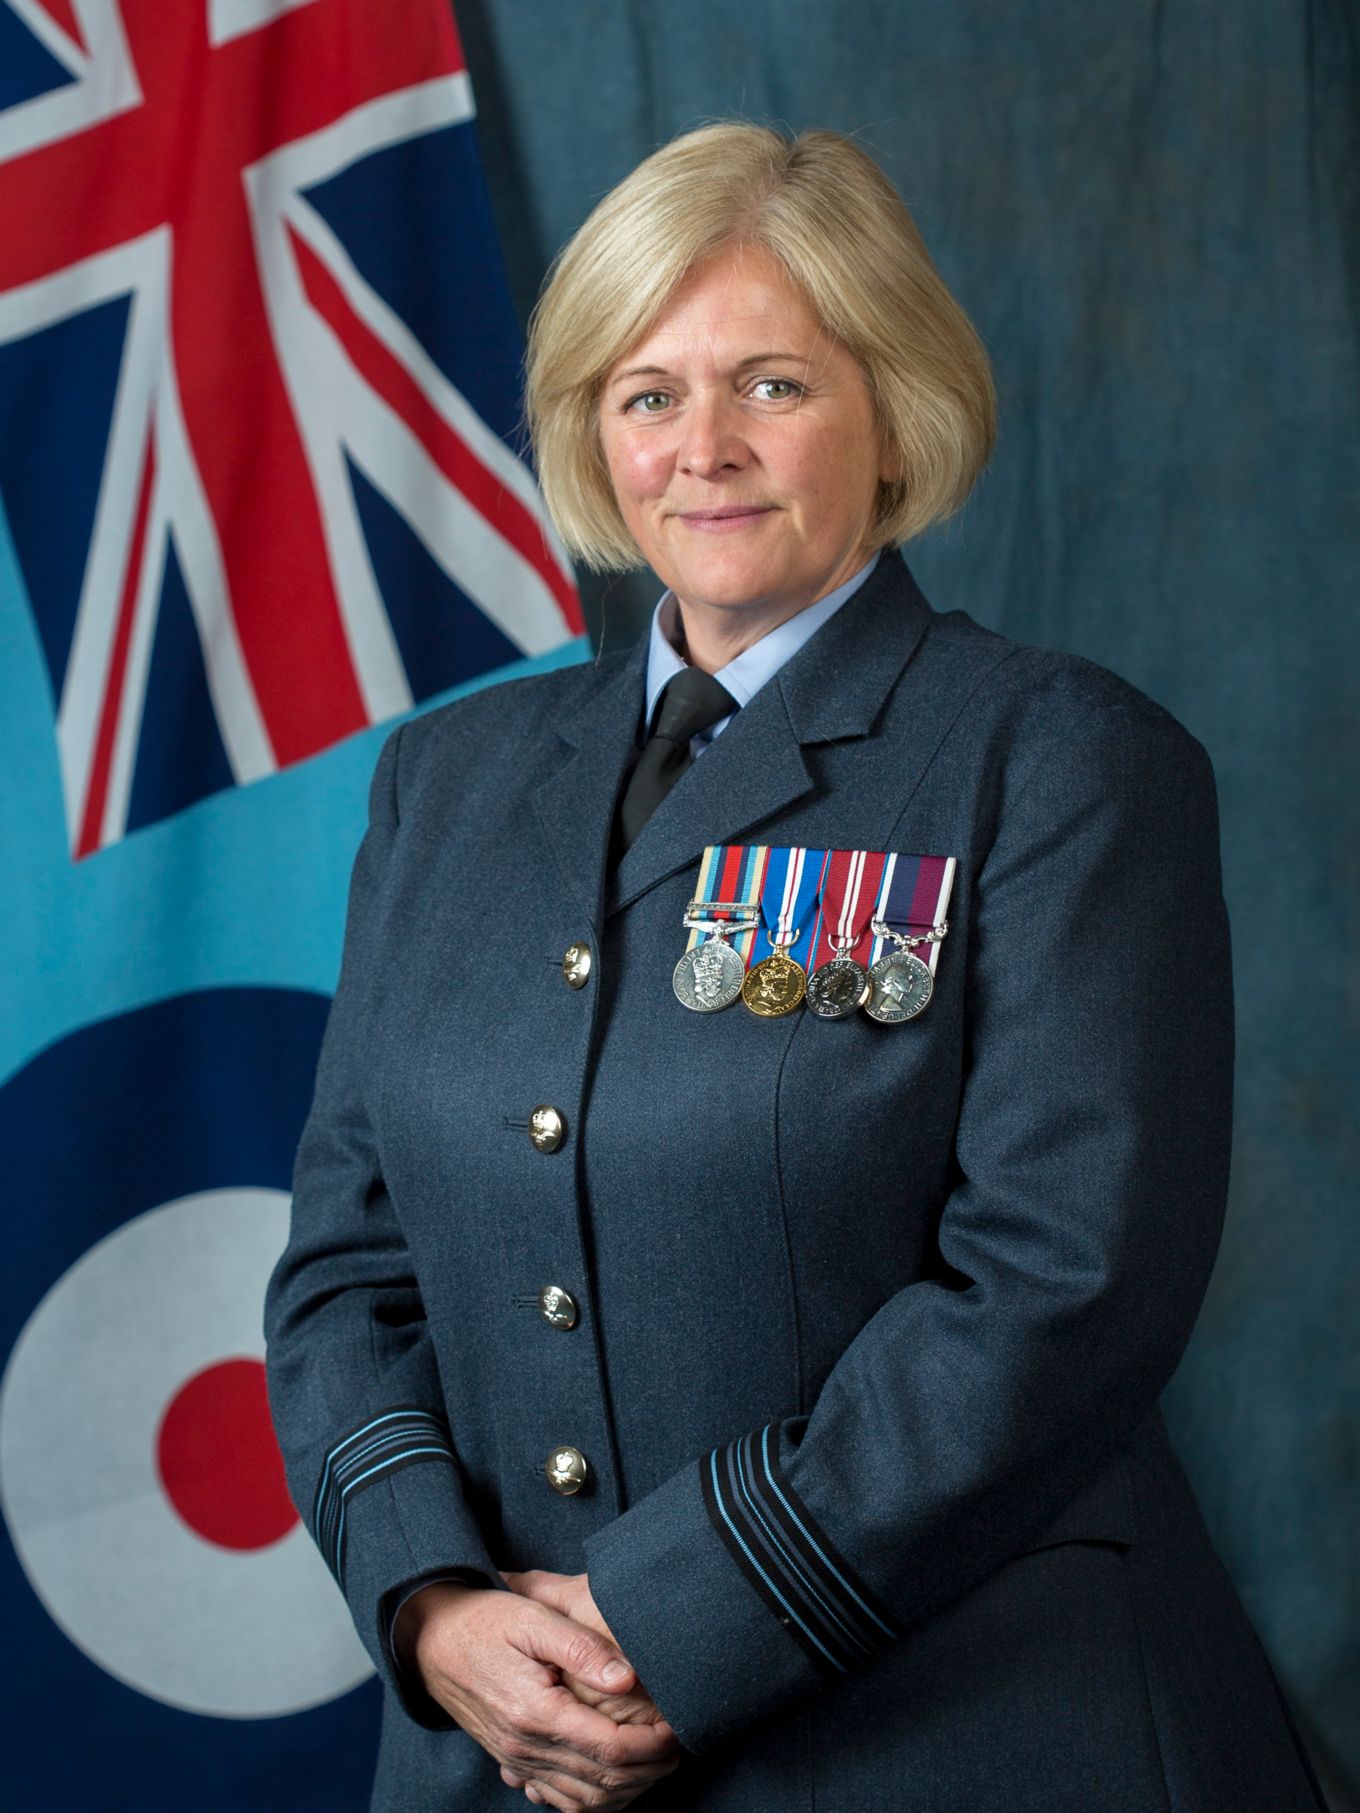 Acting Wing Commander Cartwright official portrait picture prior to promotion show her in Squadron Leader rank insignia